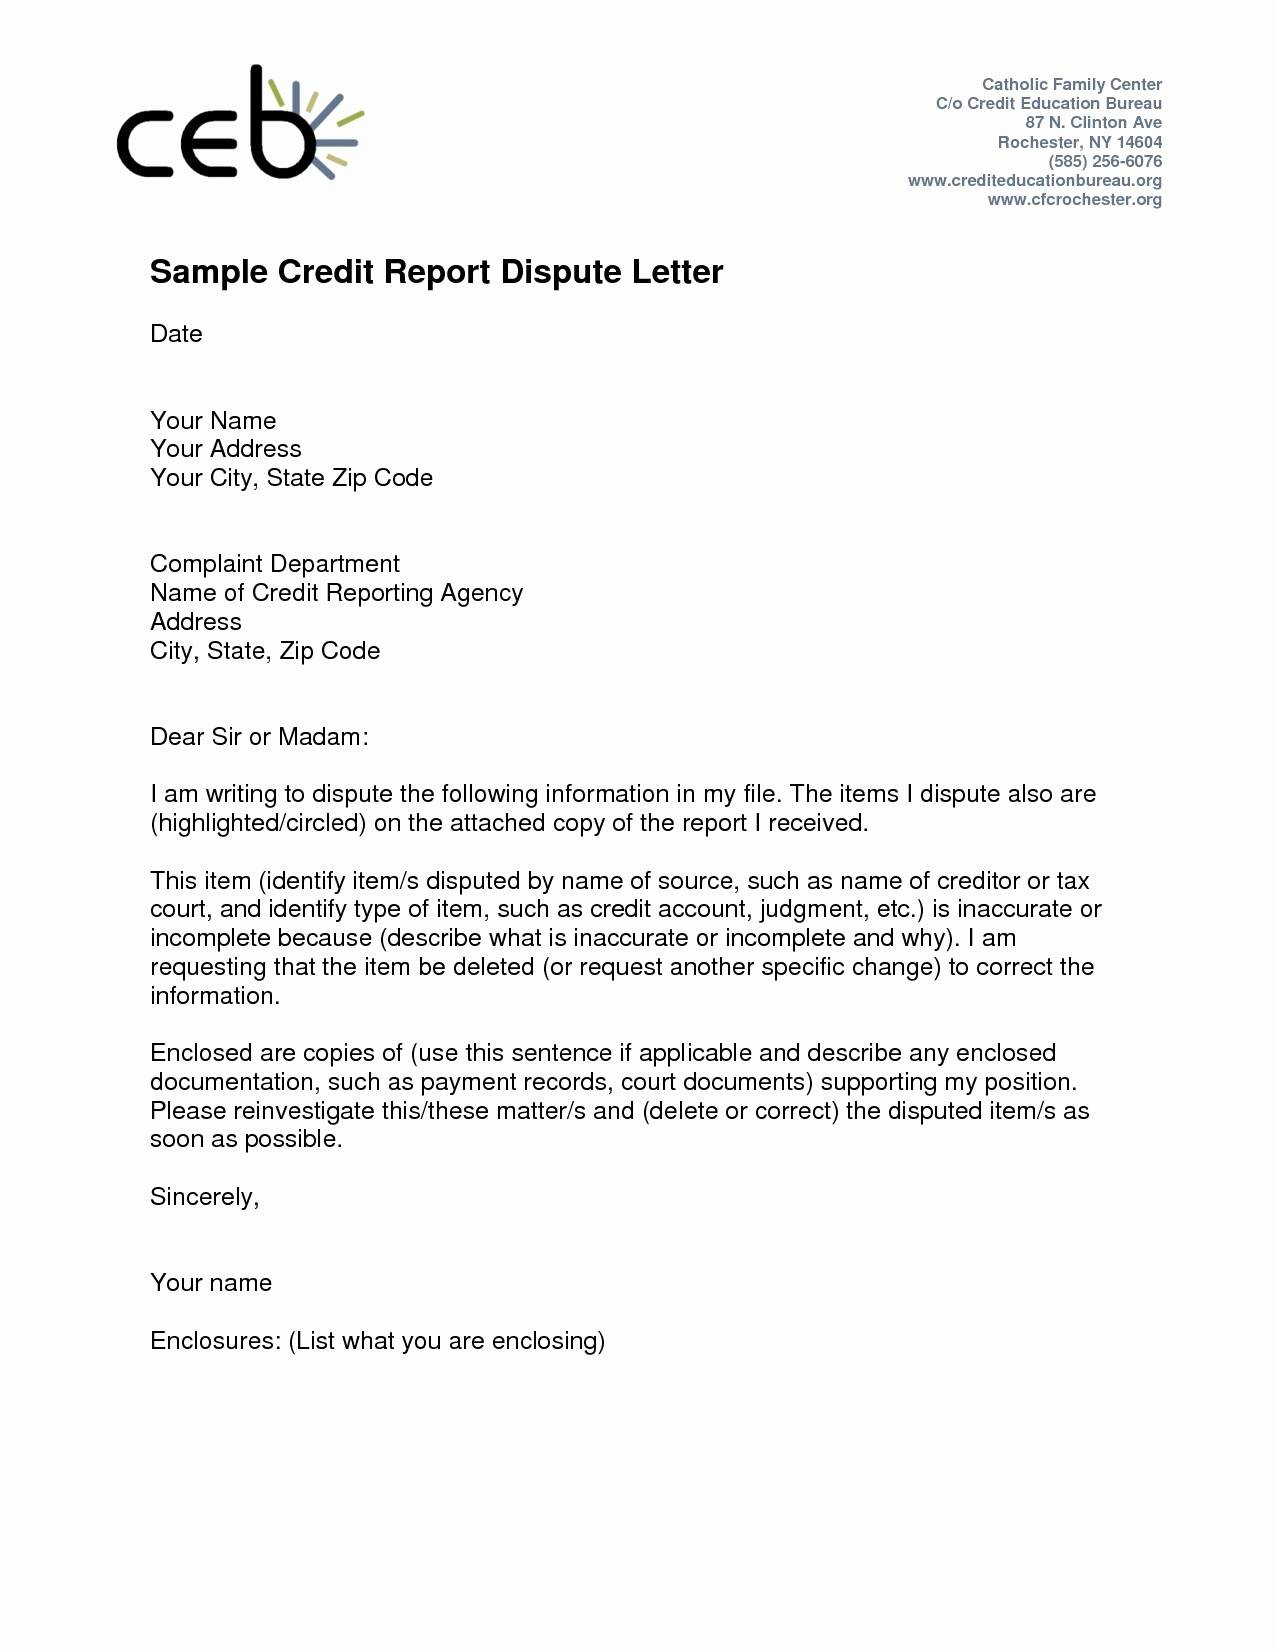 Letter Template to Dispute Credit Report - Credit Report Dispute Letter Template Luxury 15 Best the Best Way to